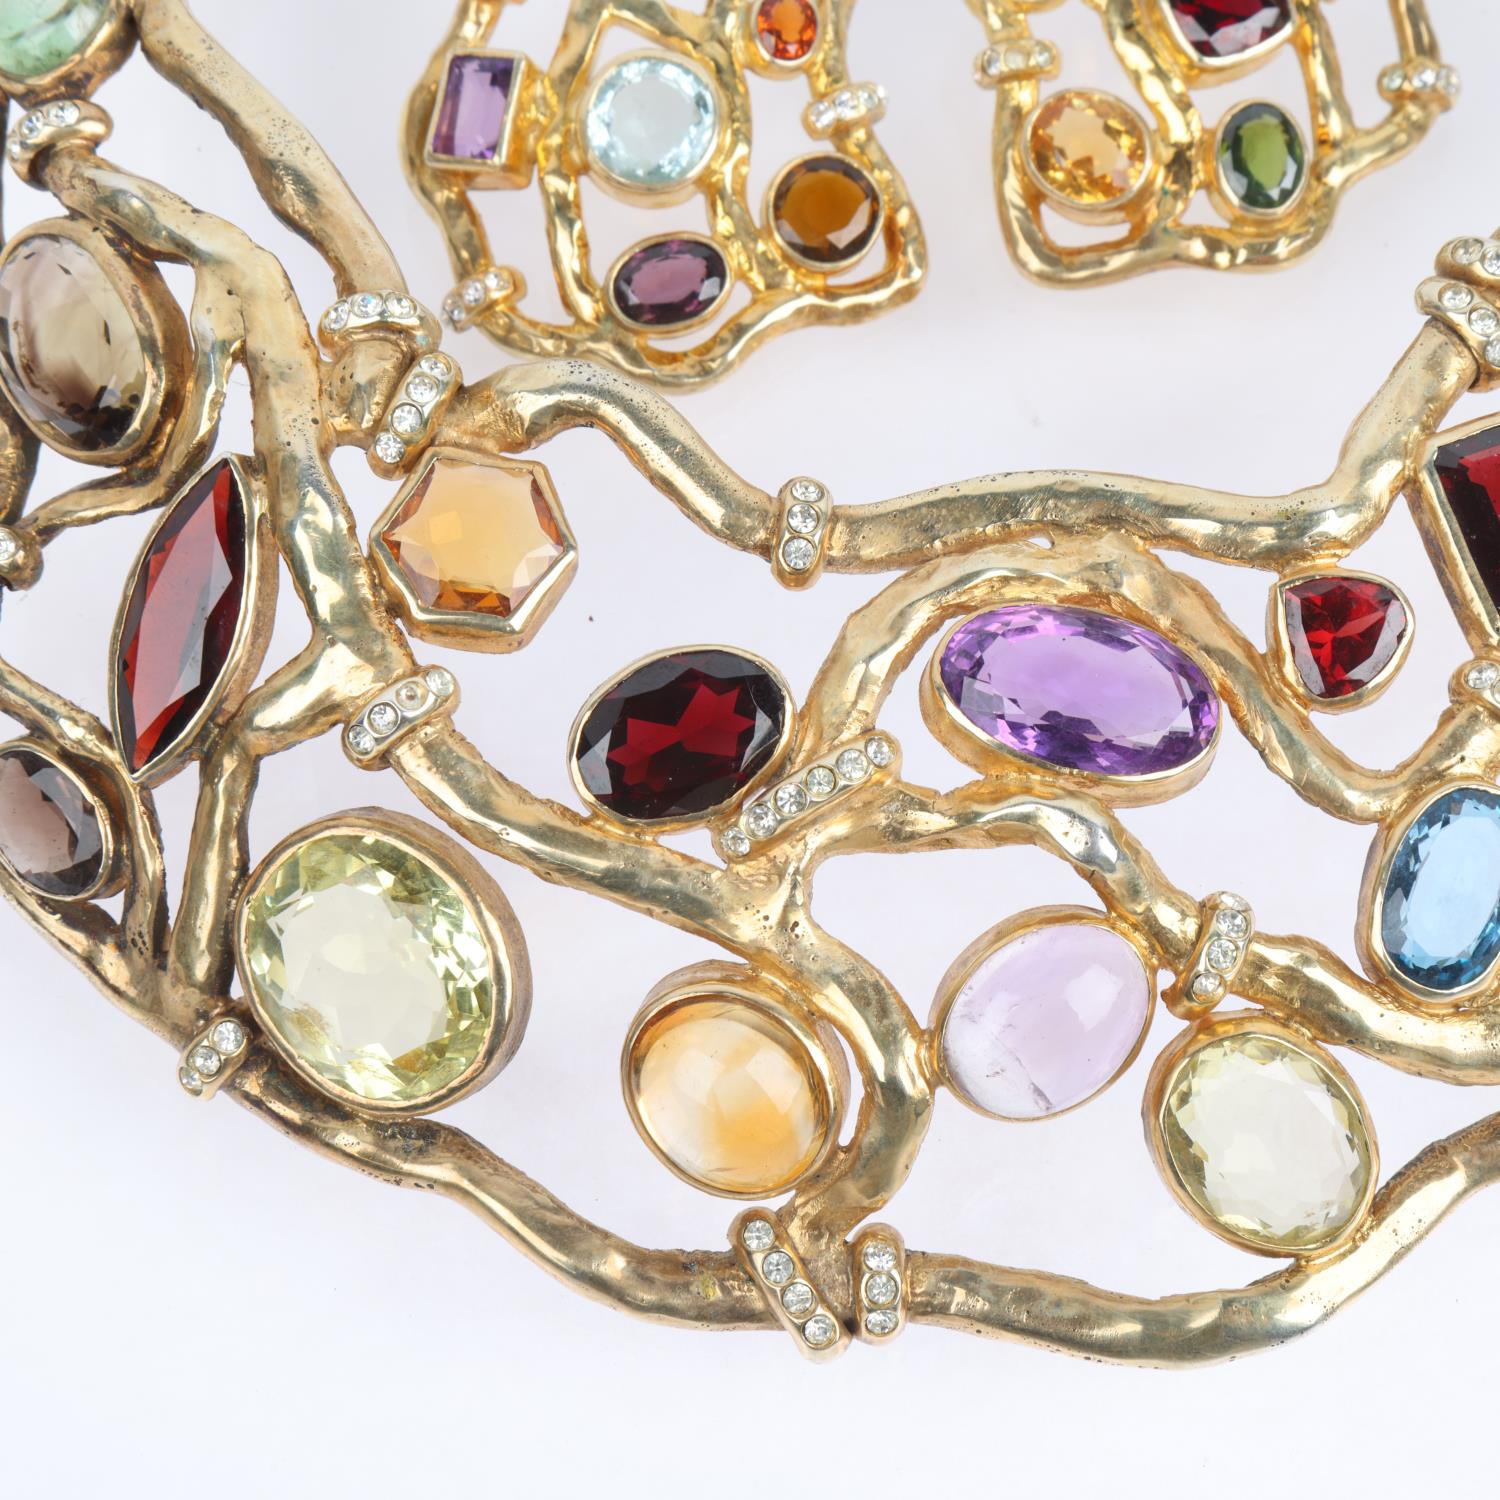 A heavy quality solid silver-gilt gem set collar bib necklace and earring set, by Peter Farrow, - Image 2 of 4